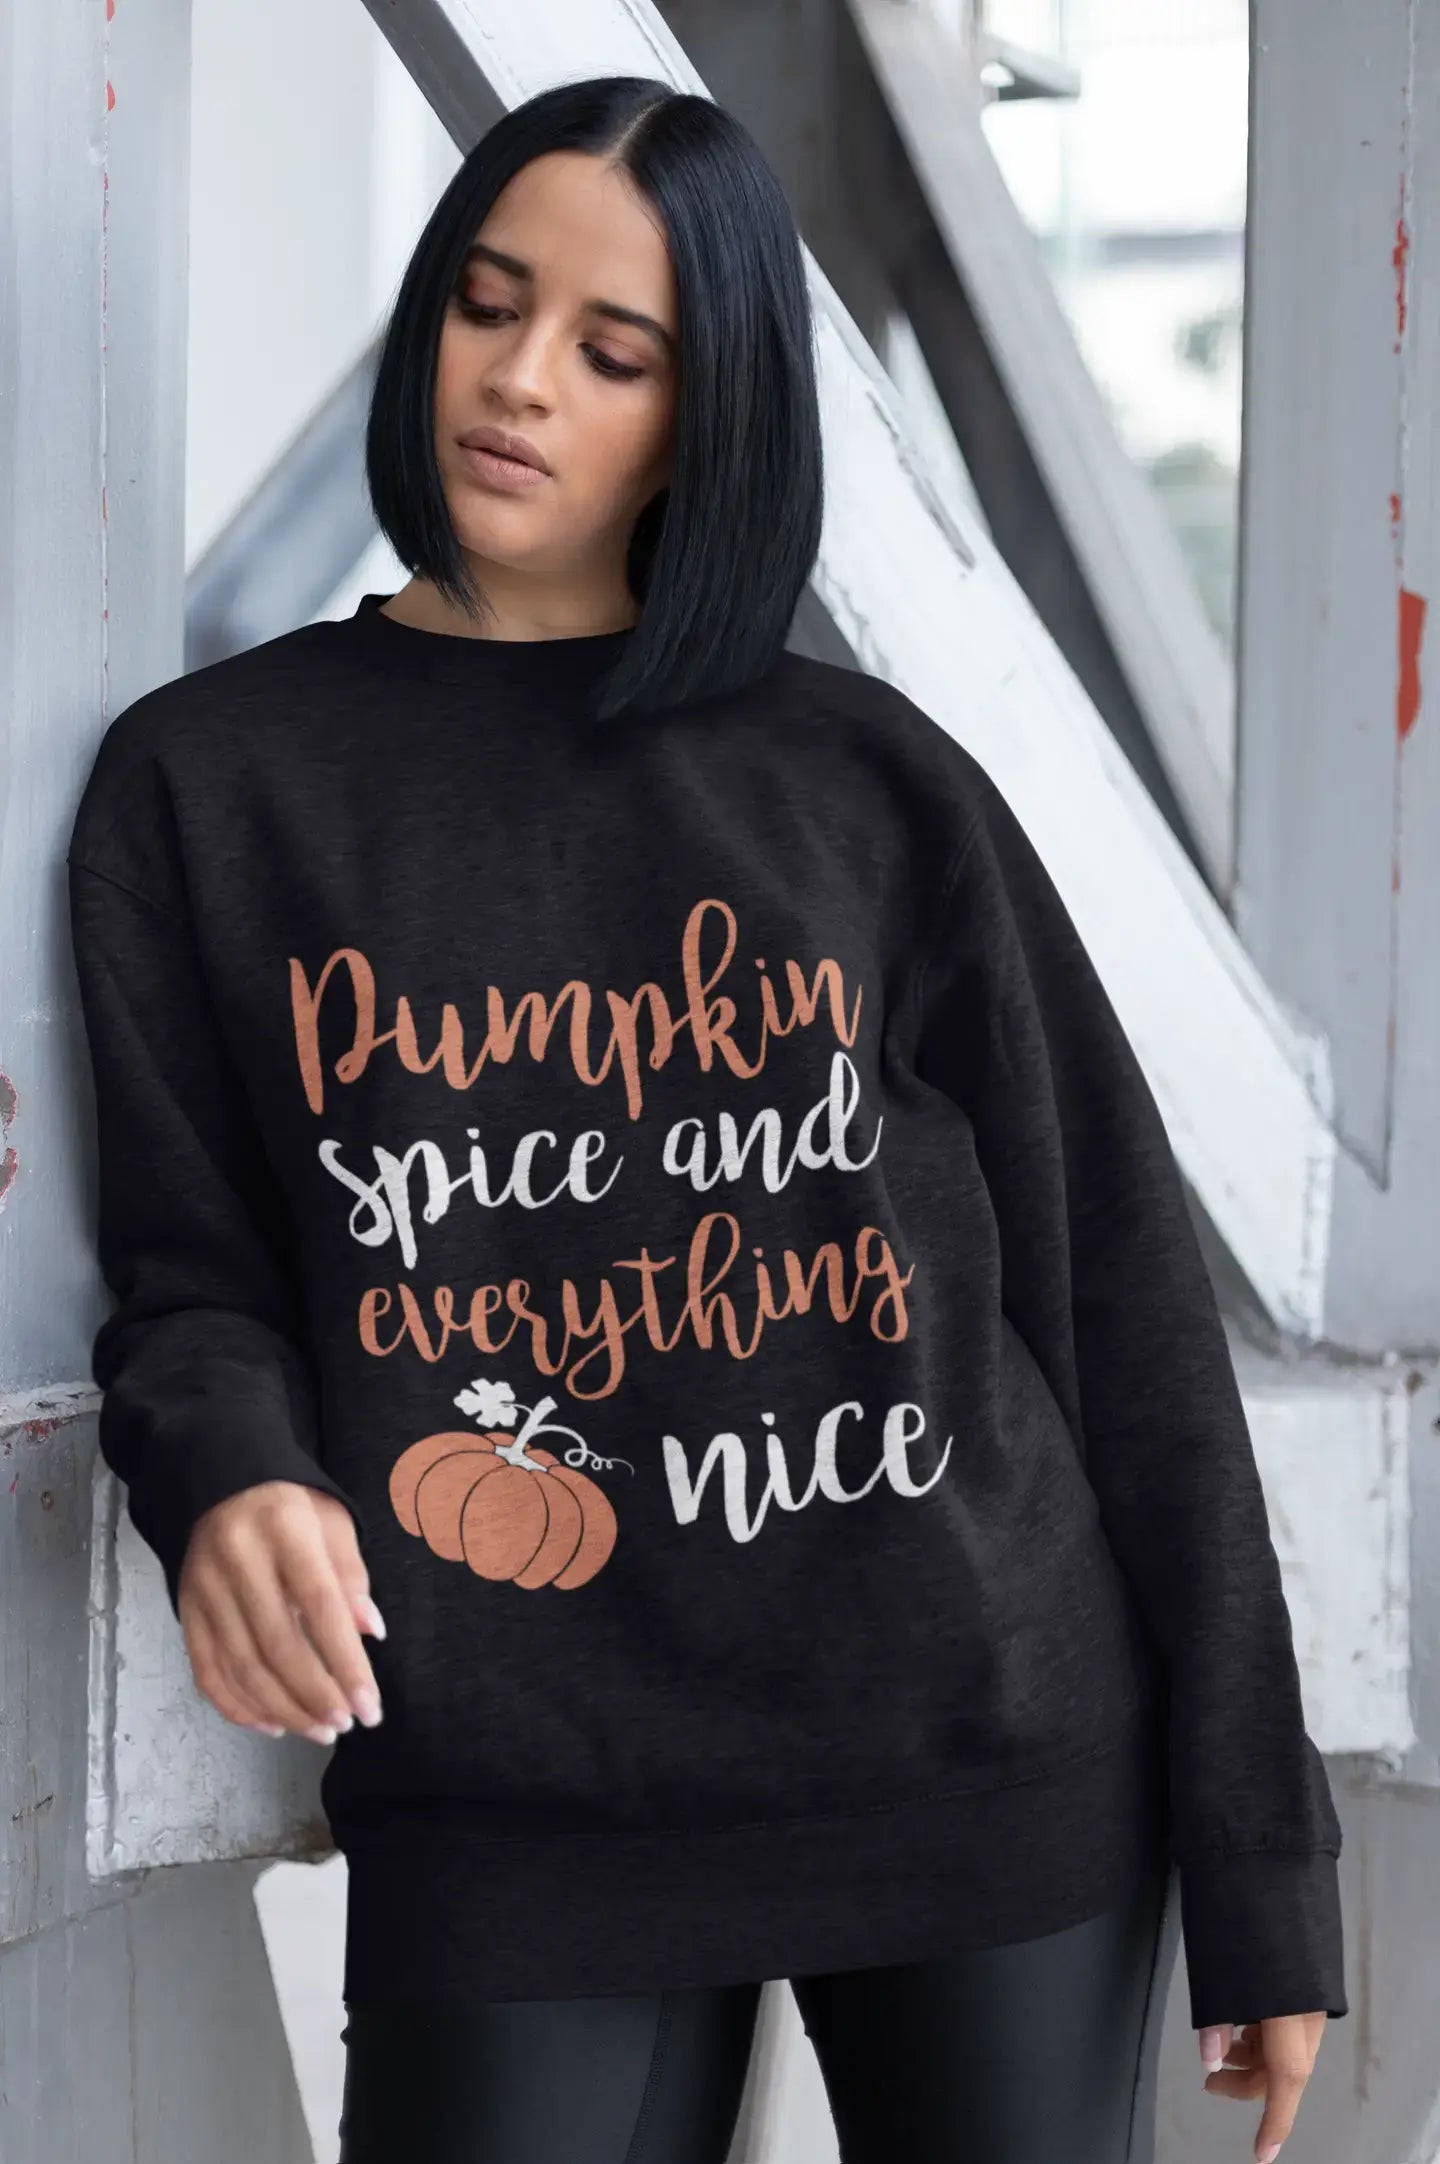 ULTRABASIC - Women's Printed Graphic Sweatshirt Pumpkin Spice And Everything Nice T-Shirt Cute Casual Letter Print Tee French Navy